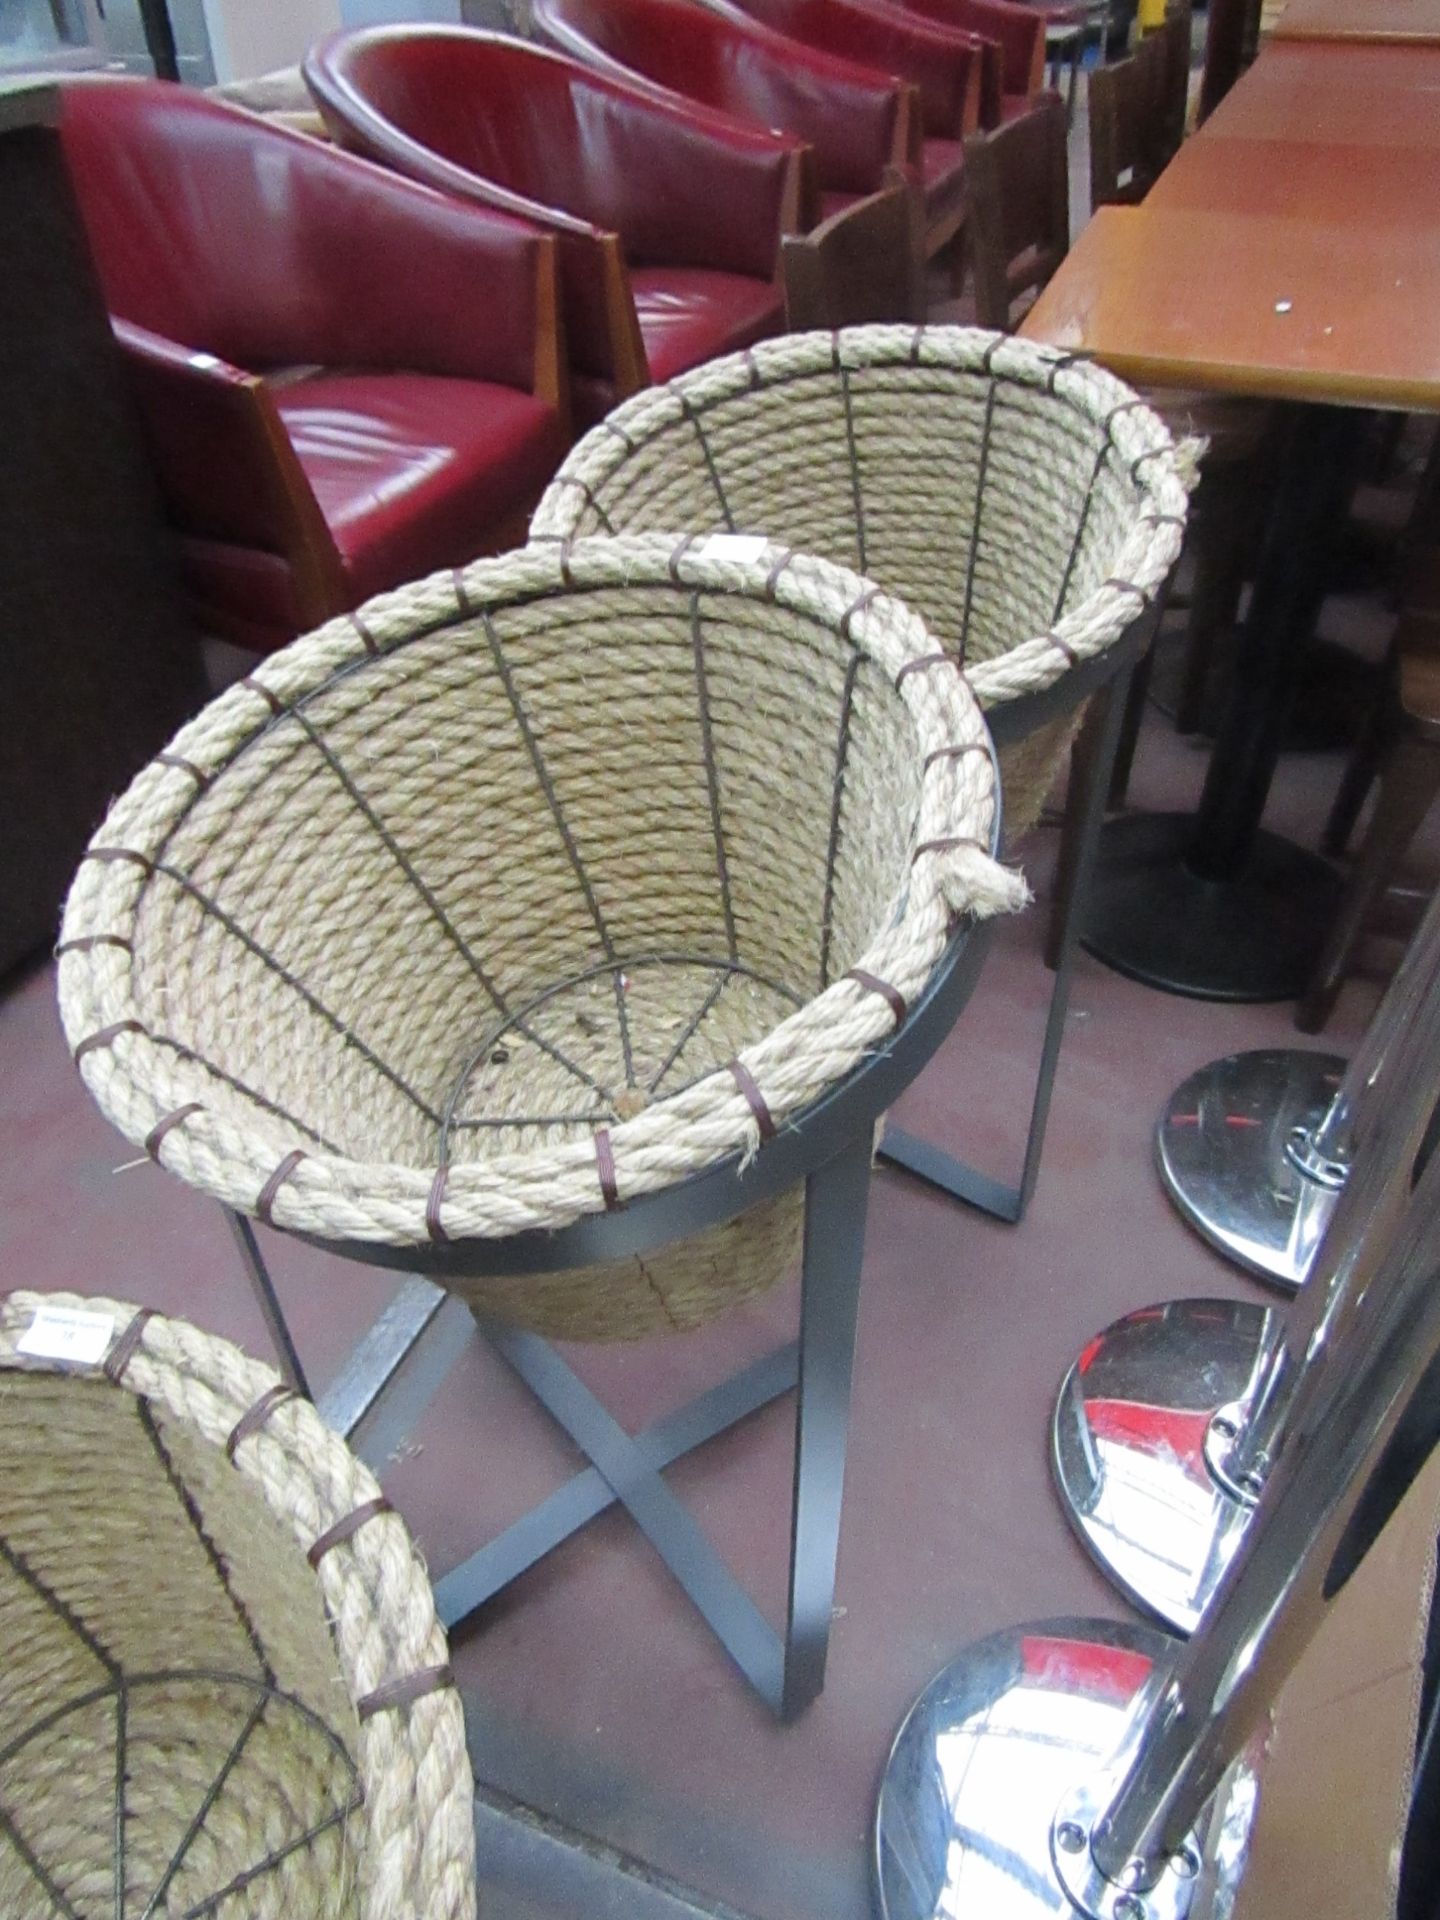 2x Large wicker baskets for holding coffee.